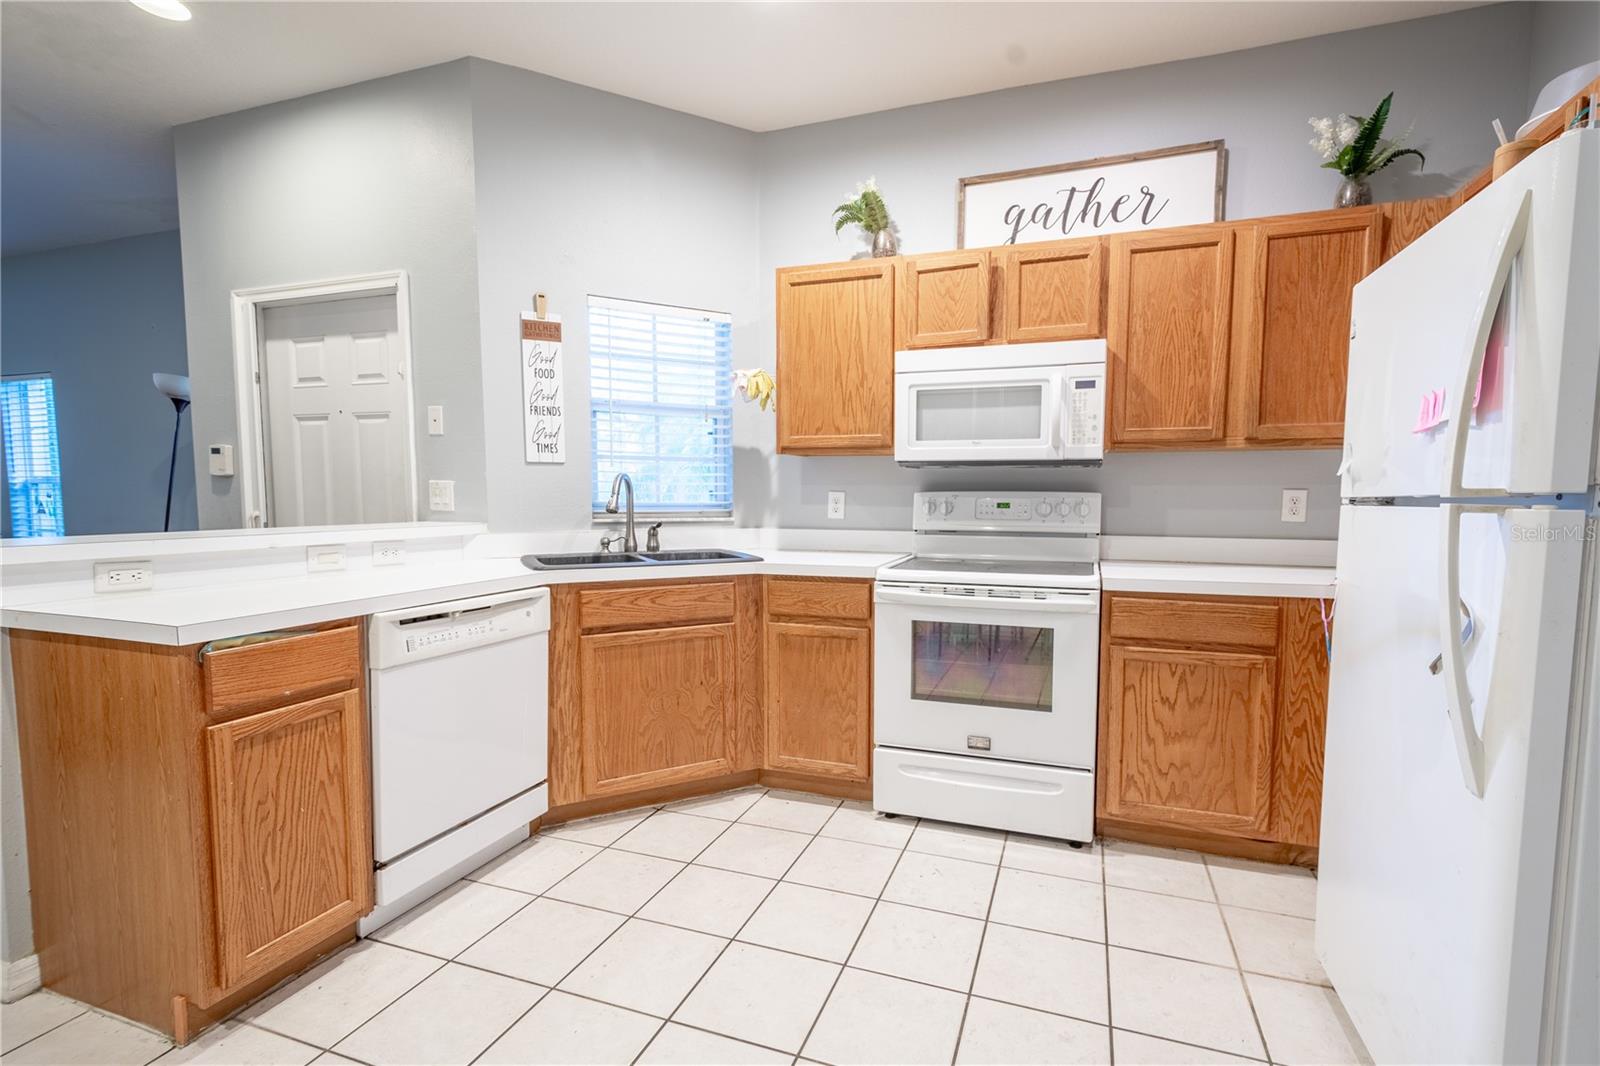 Solid counters and ceramic tile flooring make kitchen clean up a breeze.